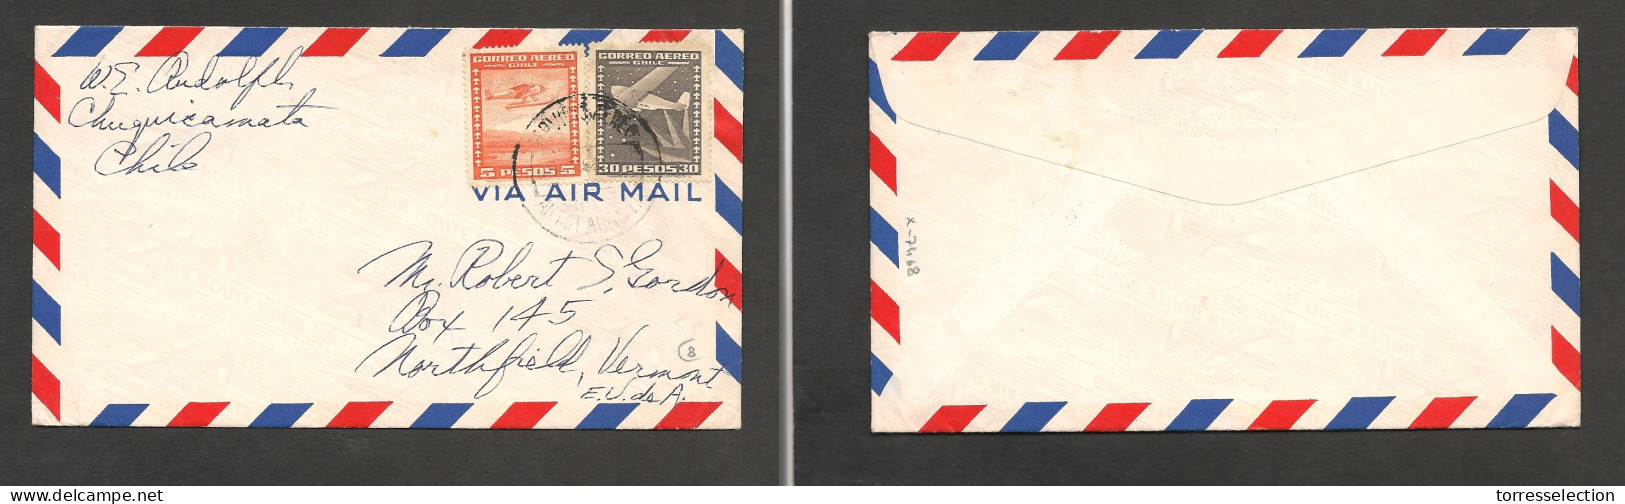 CHILE. Chile - Cover - 1956 3 Apr Antofagasta To USA Northfield Vermont Air Mult Fkd Env At 35$ Rate, Fine. Ex-Prof West - Chile